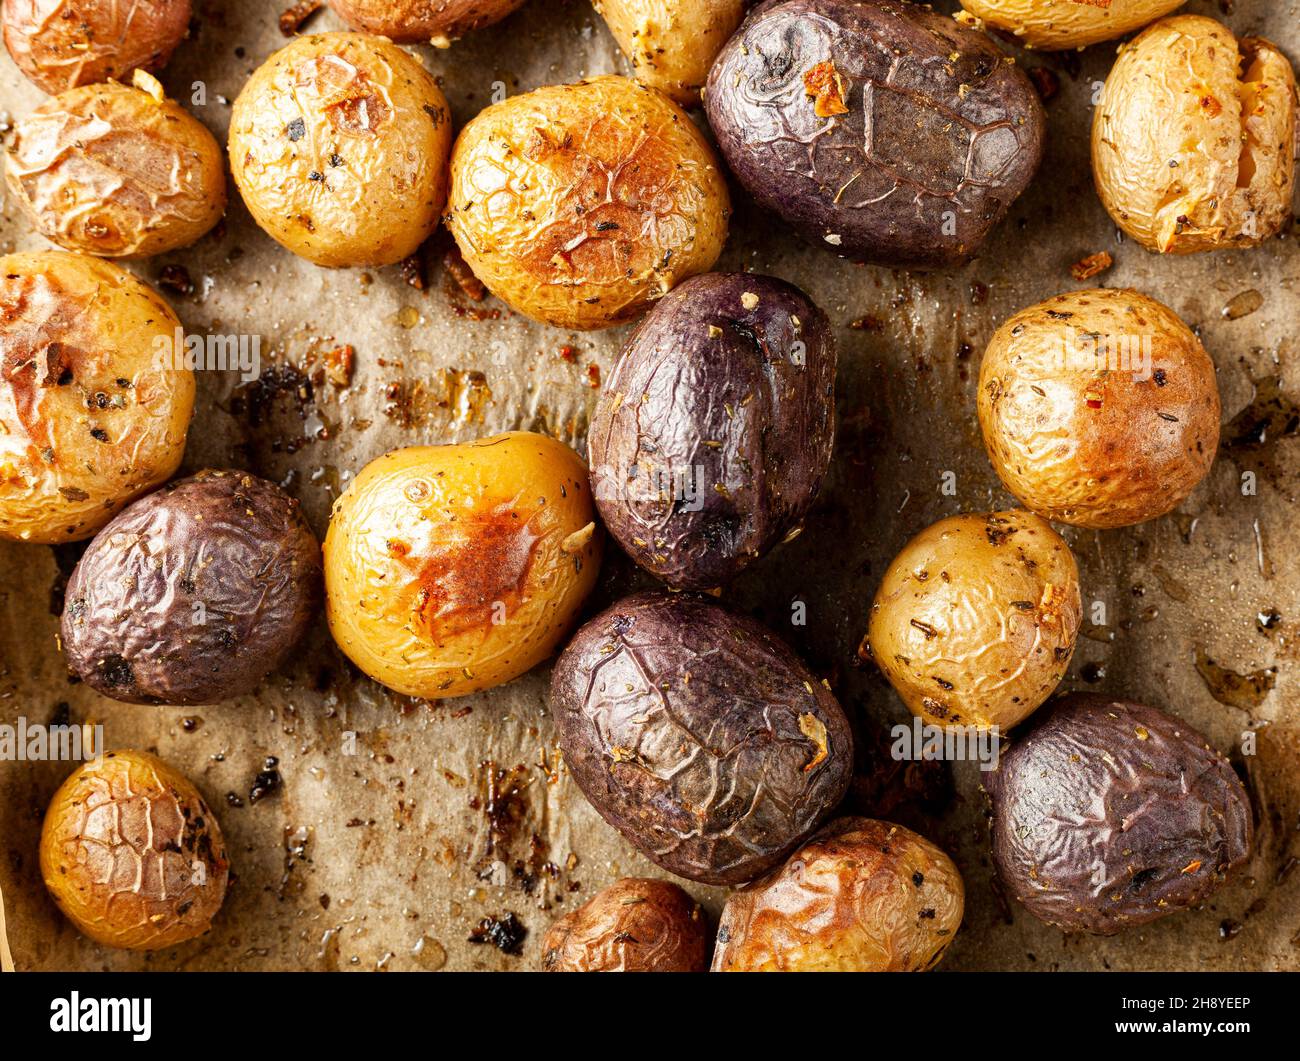 Top view close up image showing fresh oven baked potato medley with a variety including purple heart potatoes. Potatoes are cooling on baking paper. C Stock Photo